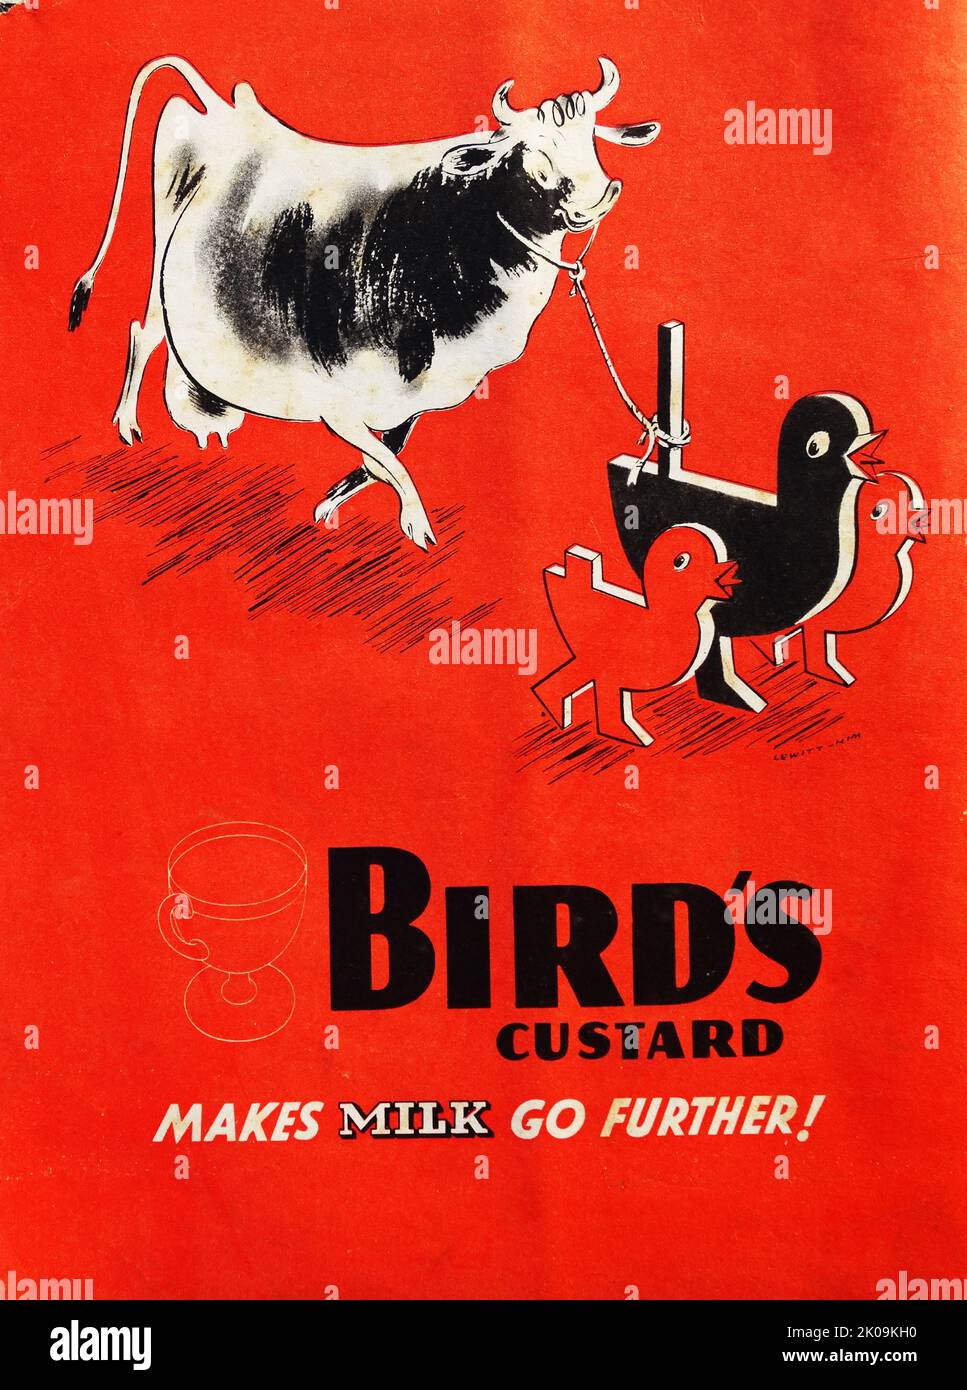 Newspaper advertisement for Bird's Custard. Bird's Custard is the brand name for the original powdered, egg-free imitation custard powder. The product is a powder, based on cornflour, which thickens to form a custard-like sauce when mixed with milk and heated. Stock Photo